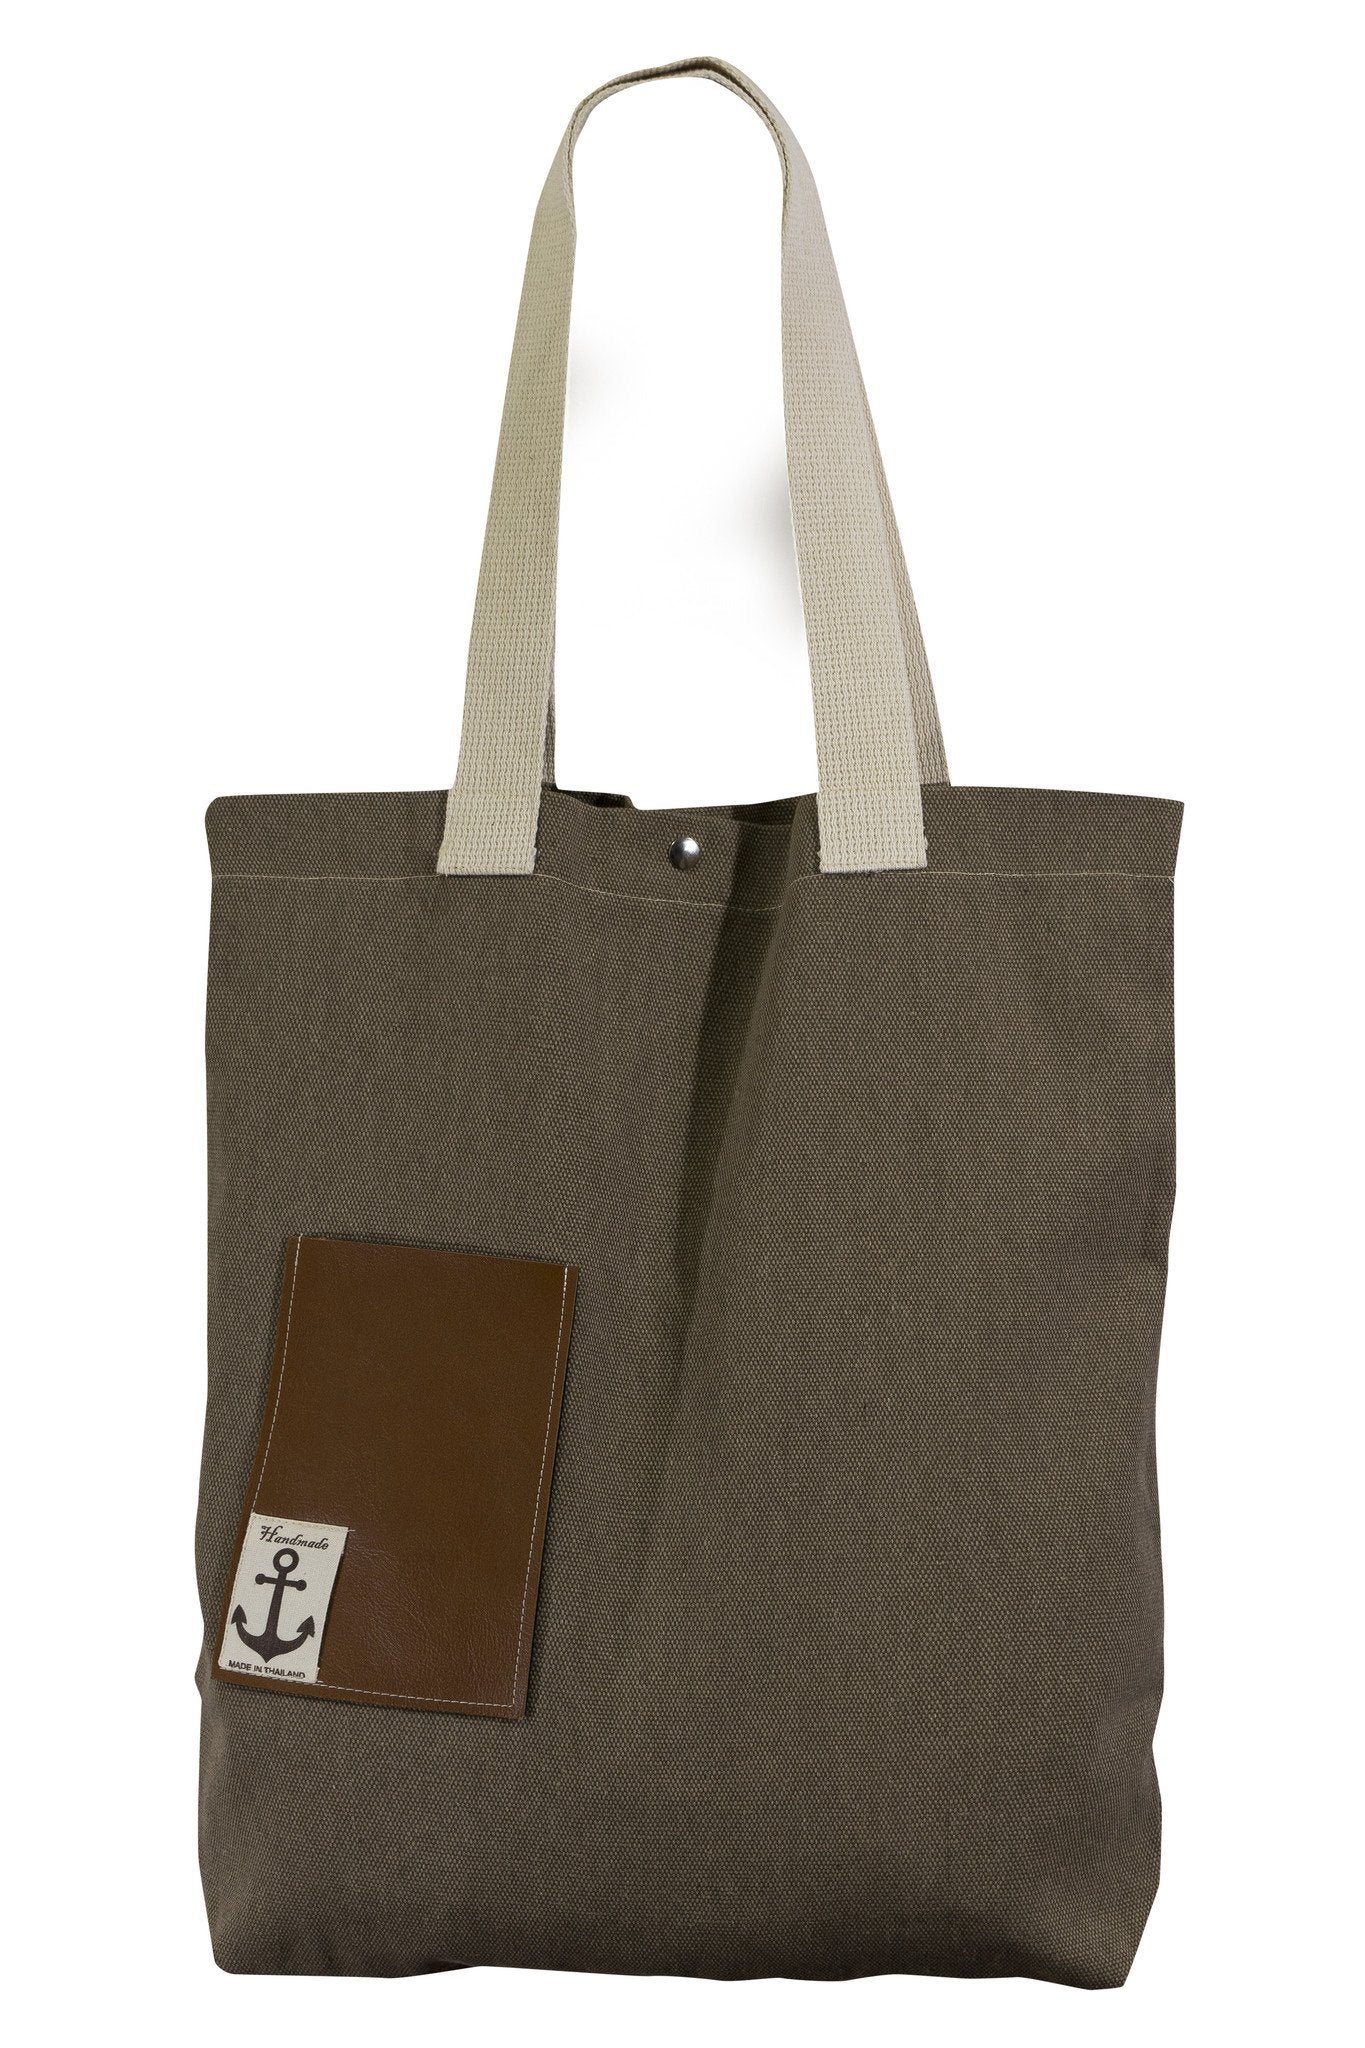 Mr. Tote Shoulder bag Cotton Canvas Printed - CCCollections